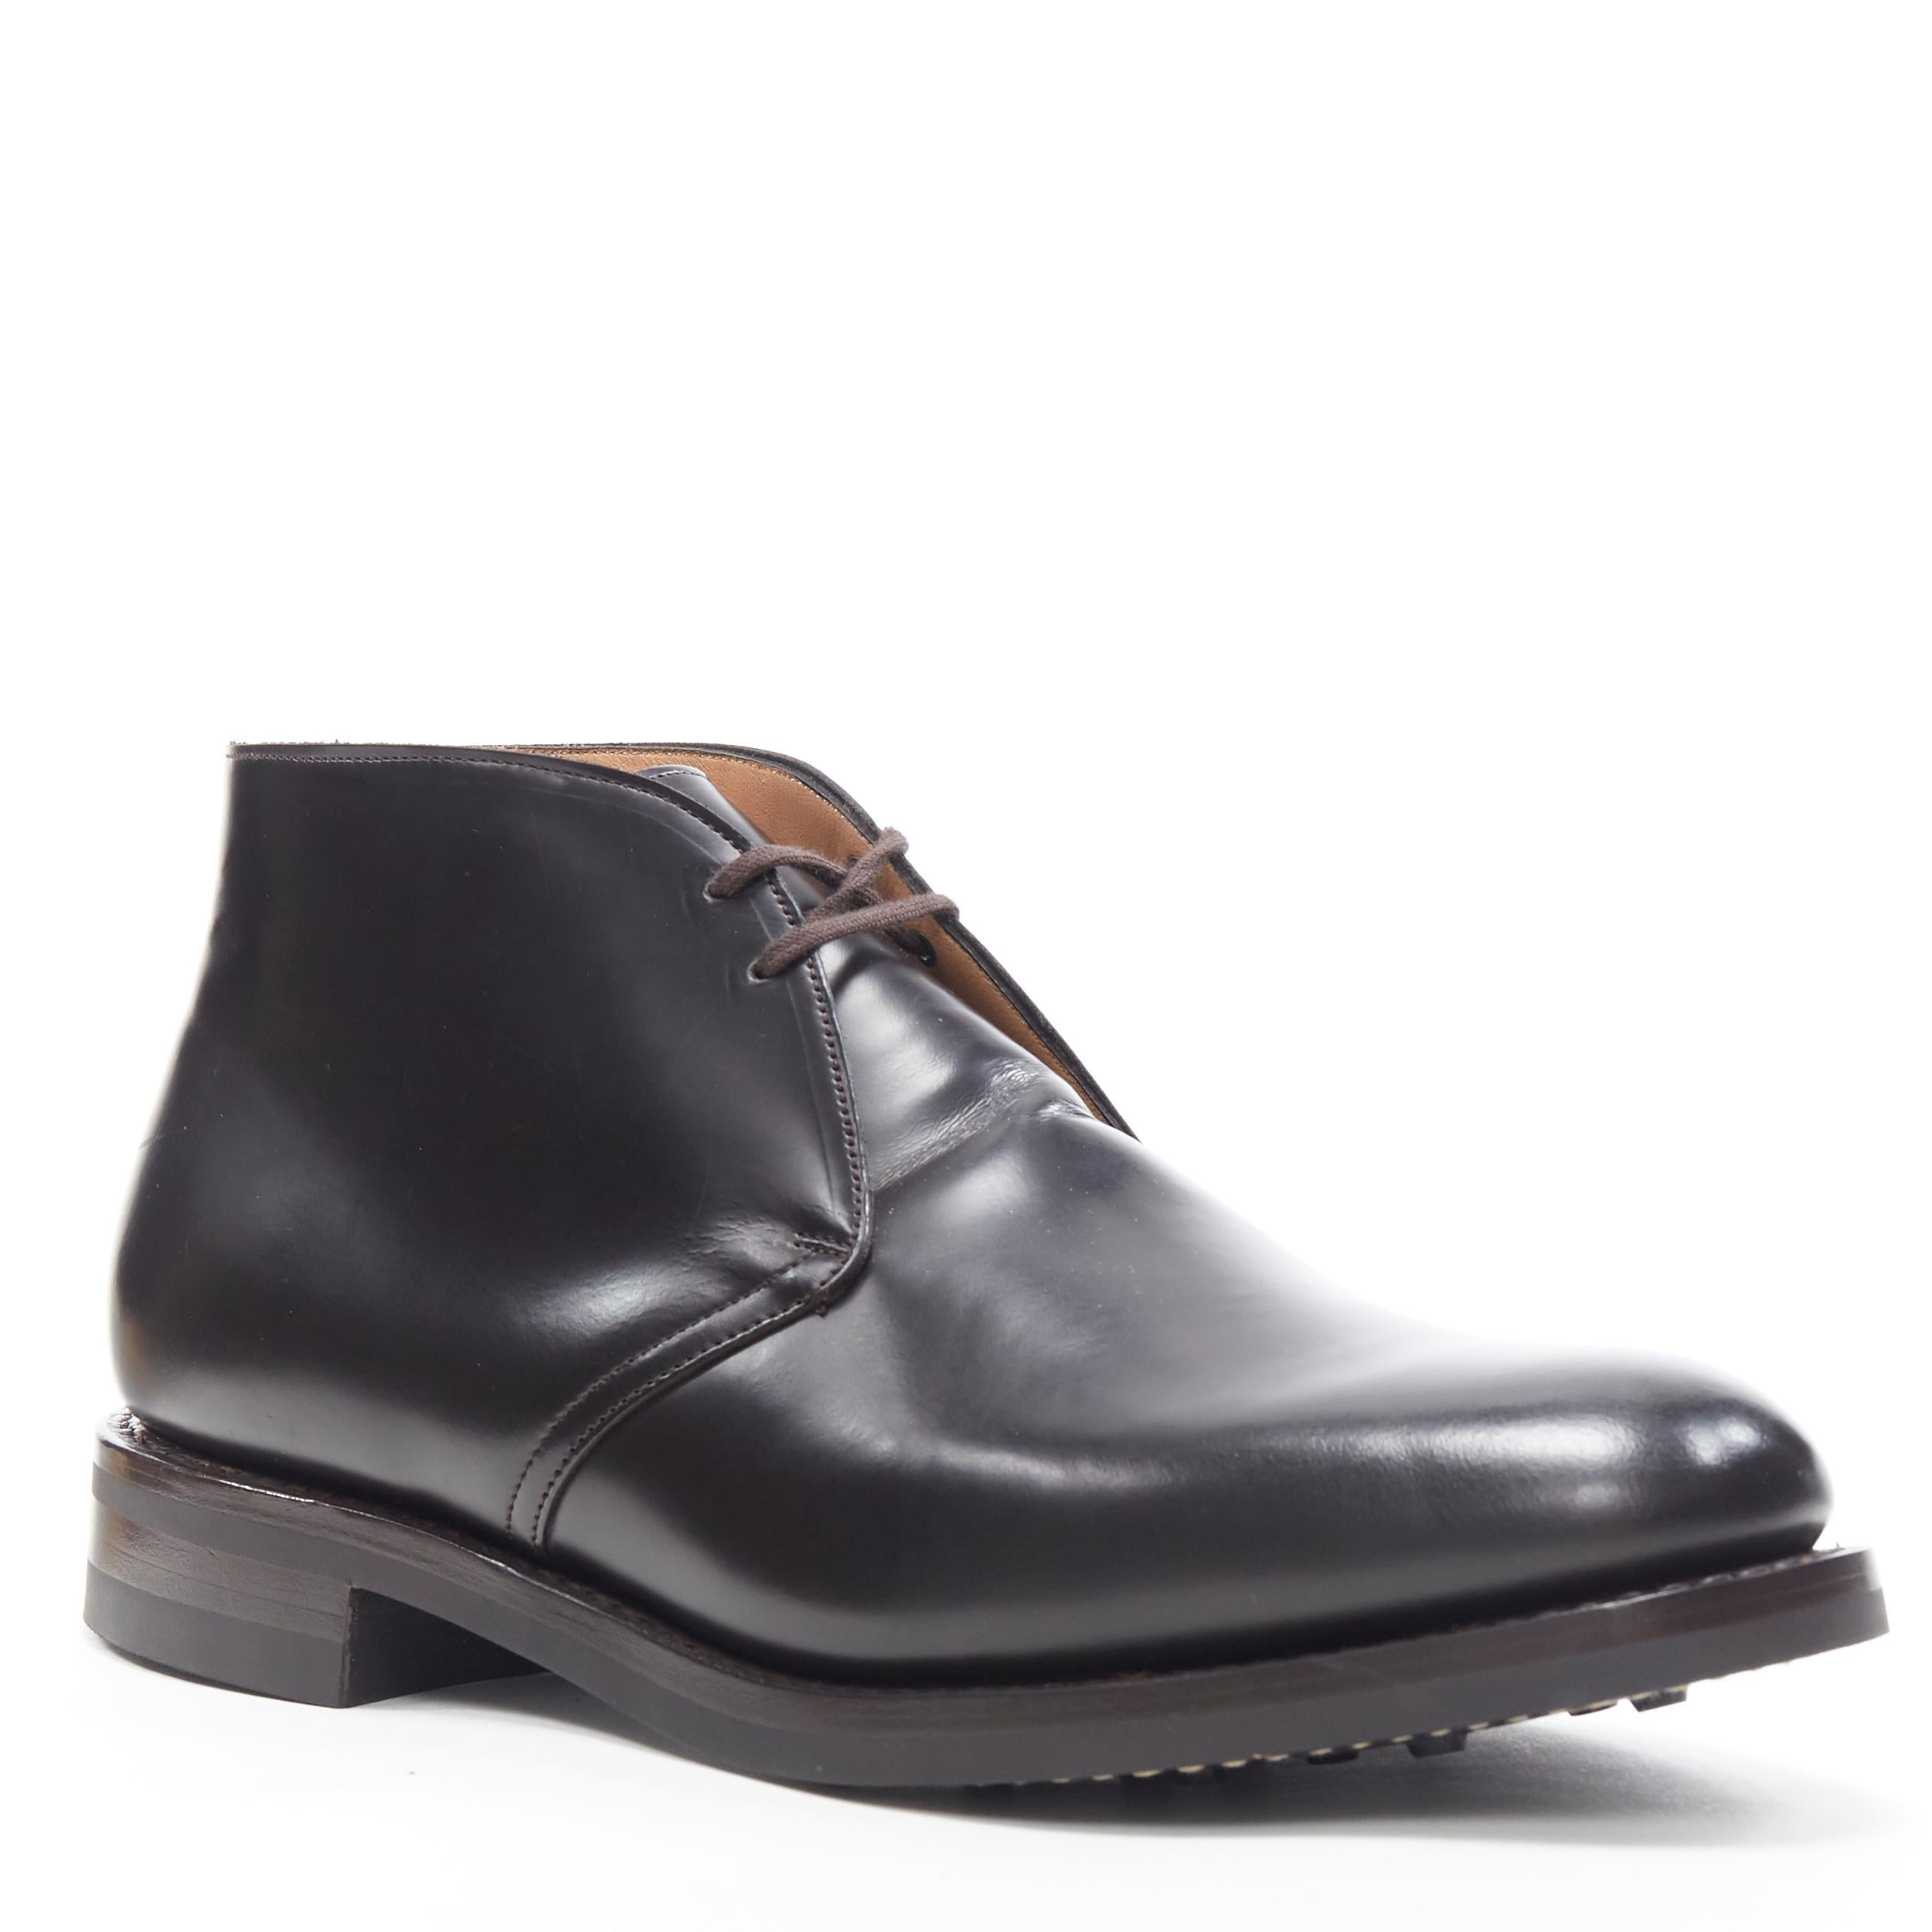 new CHURCH'S Ryder 3 Ebony Bright Calf dark brown leather desert boots UK11 EU45
Brand: Churchs
Model Name / Style: Ryder
Material: Leather
Color: Brown
Pattern: Solid
Closure: Lace up
Extra Detail: Polished dark brown 'Ebony' leather upper. Tonal